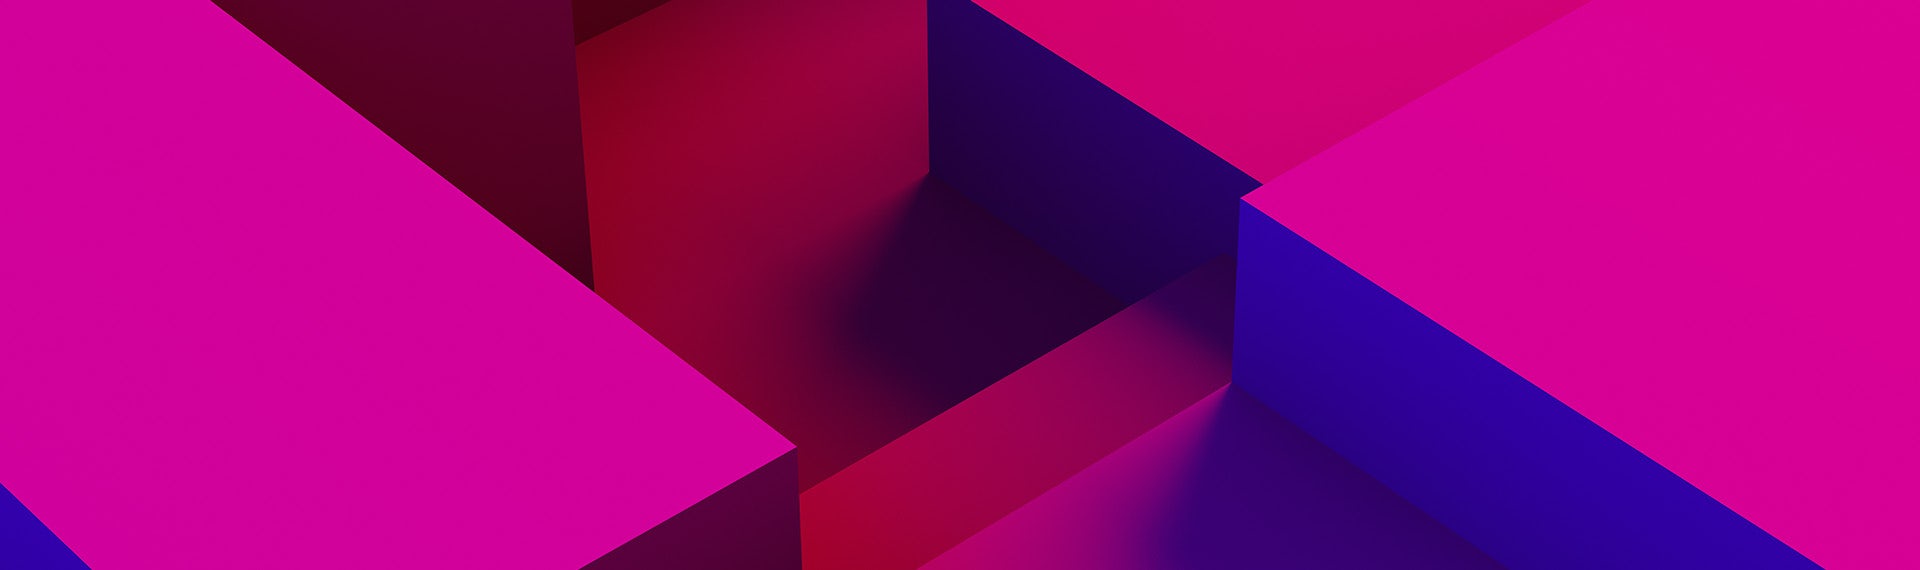 A pink, blue, and purple abstract background.